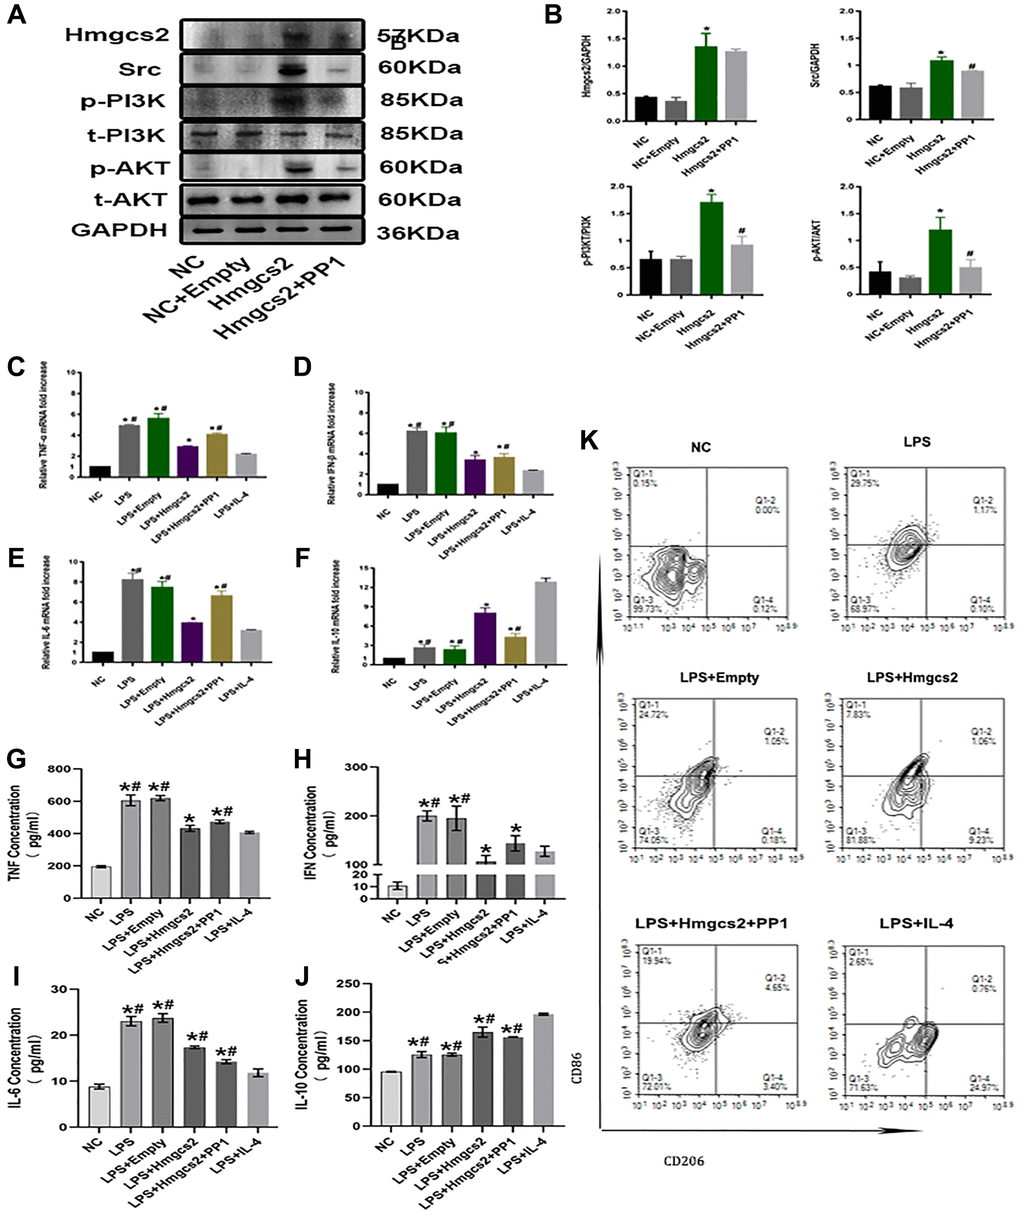 Hmgcs2 promotes macrophage M2 polarization by activating Src/PI3K/AKT pathway. (A) Relative expression of Hmgcs2 and Src/PI3K/AKT pathway-related proteins in cells from each group. (B) Statistical results of relative expression of Hmgcs2 and Src/PI3K/Akt pathway-related proteins of cells in each group. (C) The mRNA relative expression of TNF-α of macrophages in each group. (D) The mRNA relative expression of IFN-β of macrophages in each group. (E) The mRNA relative expression of IL-6 of macrophages in each group. (F) The mRNA relative expression of IL-10 of macrophages in each group. (G) Concentrations of TNF-α for macrophages in each group (pg/ml). (H) The concentration of IFN-β in the macrophages of each group (pg/ml). (I) The concentration of IL-6 in macrophages from each group (pg/ml). (J) The concentration of IL-10 in macrophages from each group (pg/ml). (K) The flow cytometry of the macrophage polarization in distinct groups. Abbreviations: NC: control group; LPS: LPS induced M1 type macrophages; LPS+ empty: M1 macrophage group transfected with empty plasmid; LPS+Hmgcs2: Hmgcs2 over-expressing M1 macrophage group; LPS+Hmgcs2+PP1: M1 macrophages with over-expression of Hmgcs2 based on PP1 administration; LPS+IL-4: LPS+IL-4 induced M2 type macrophages. *P **P ***P #P ##P ###P 